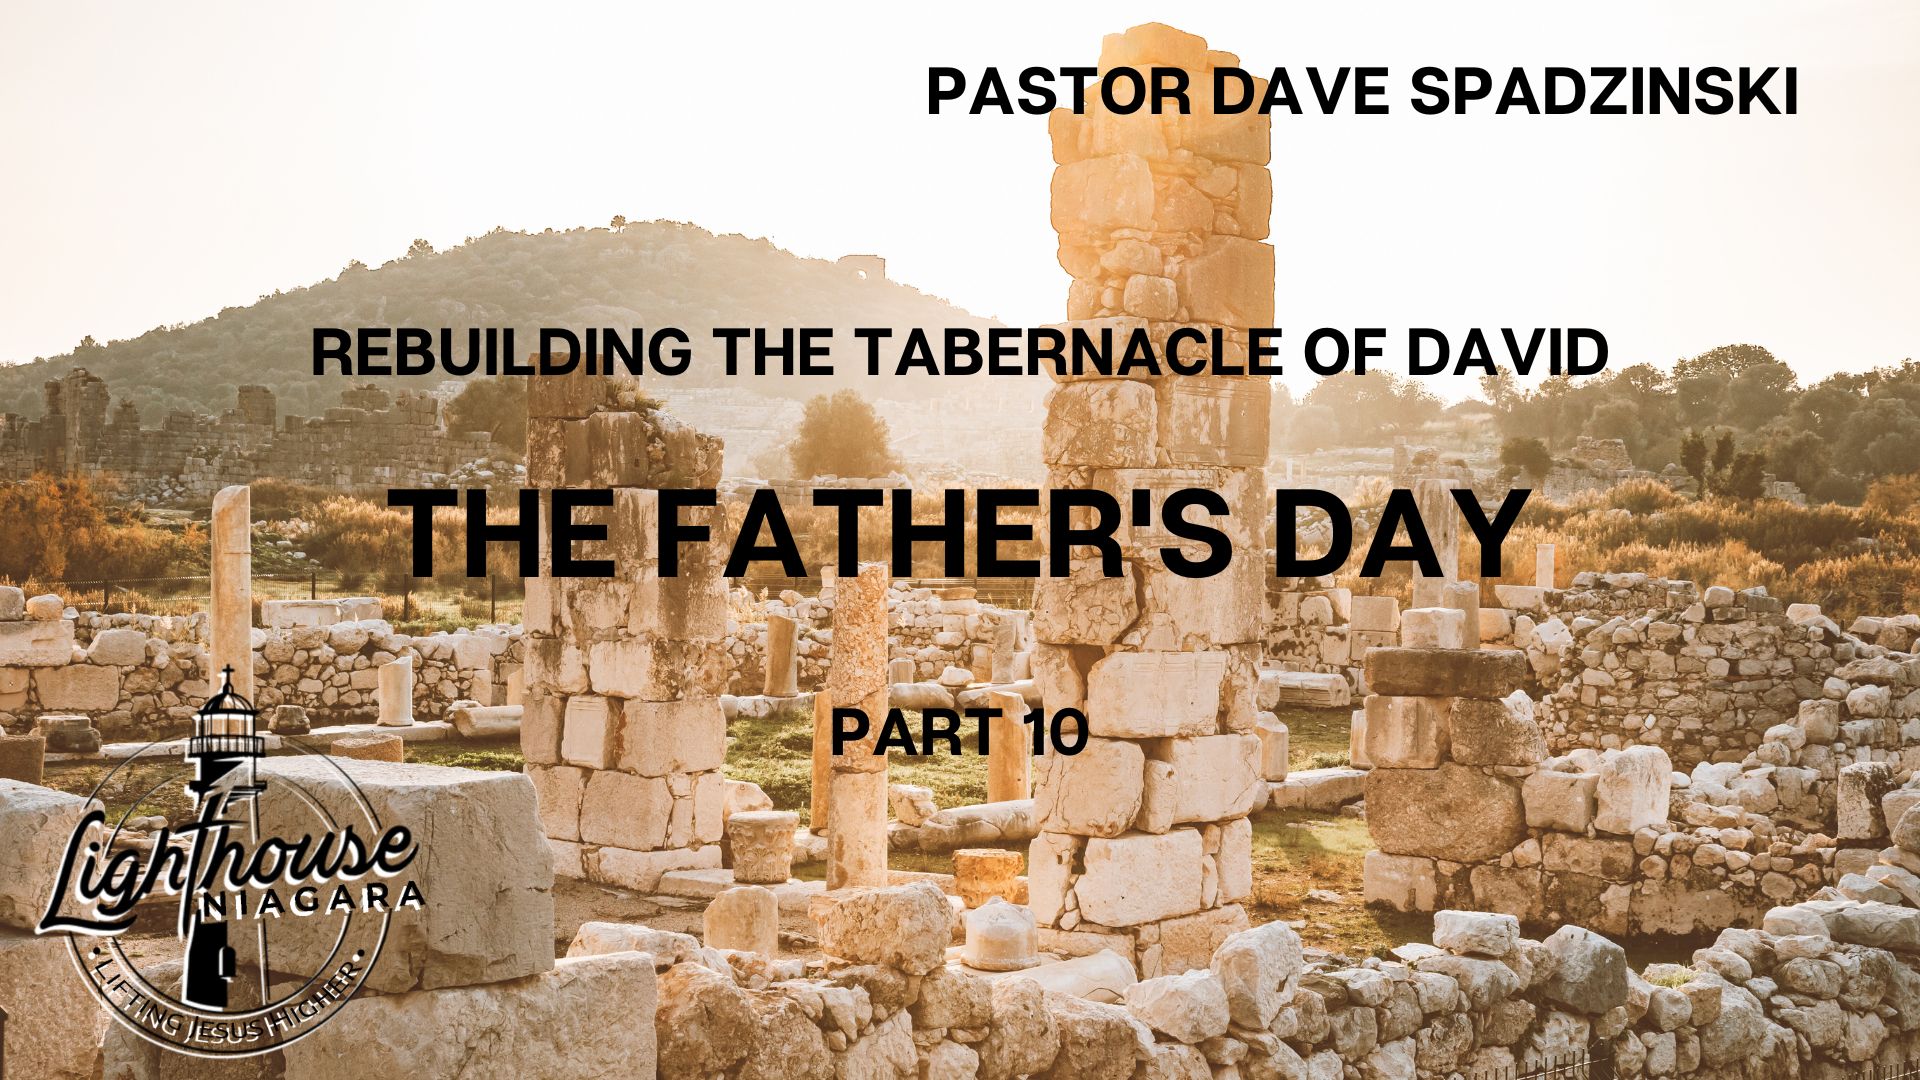 Rebuilding the Tabernacle of David: The Father's Day - Pastor Dave Spadzinski